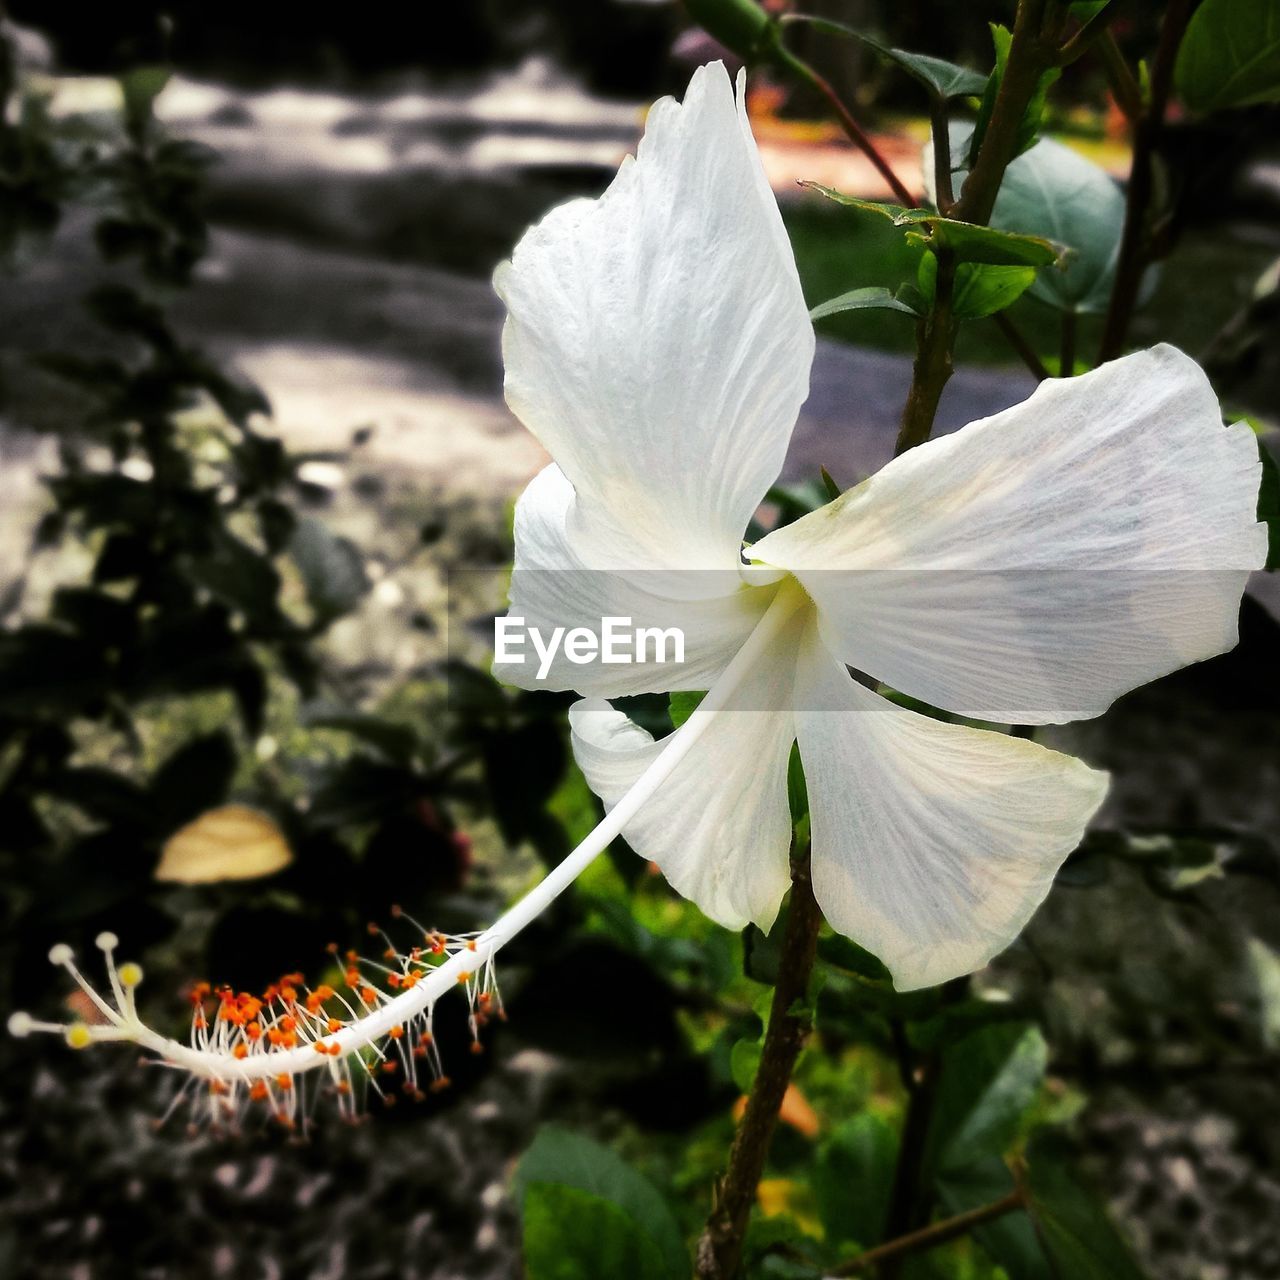 bunga raya Flower Fragility Nature White Color Day Flower Head Growth No People Freshness Outdoors Beauty In Nature Close-up Plant Petal